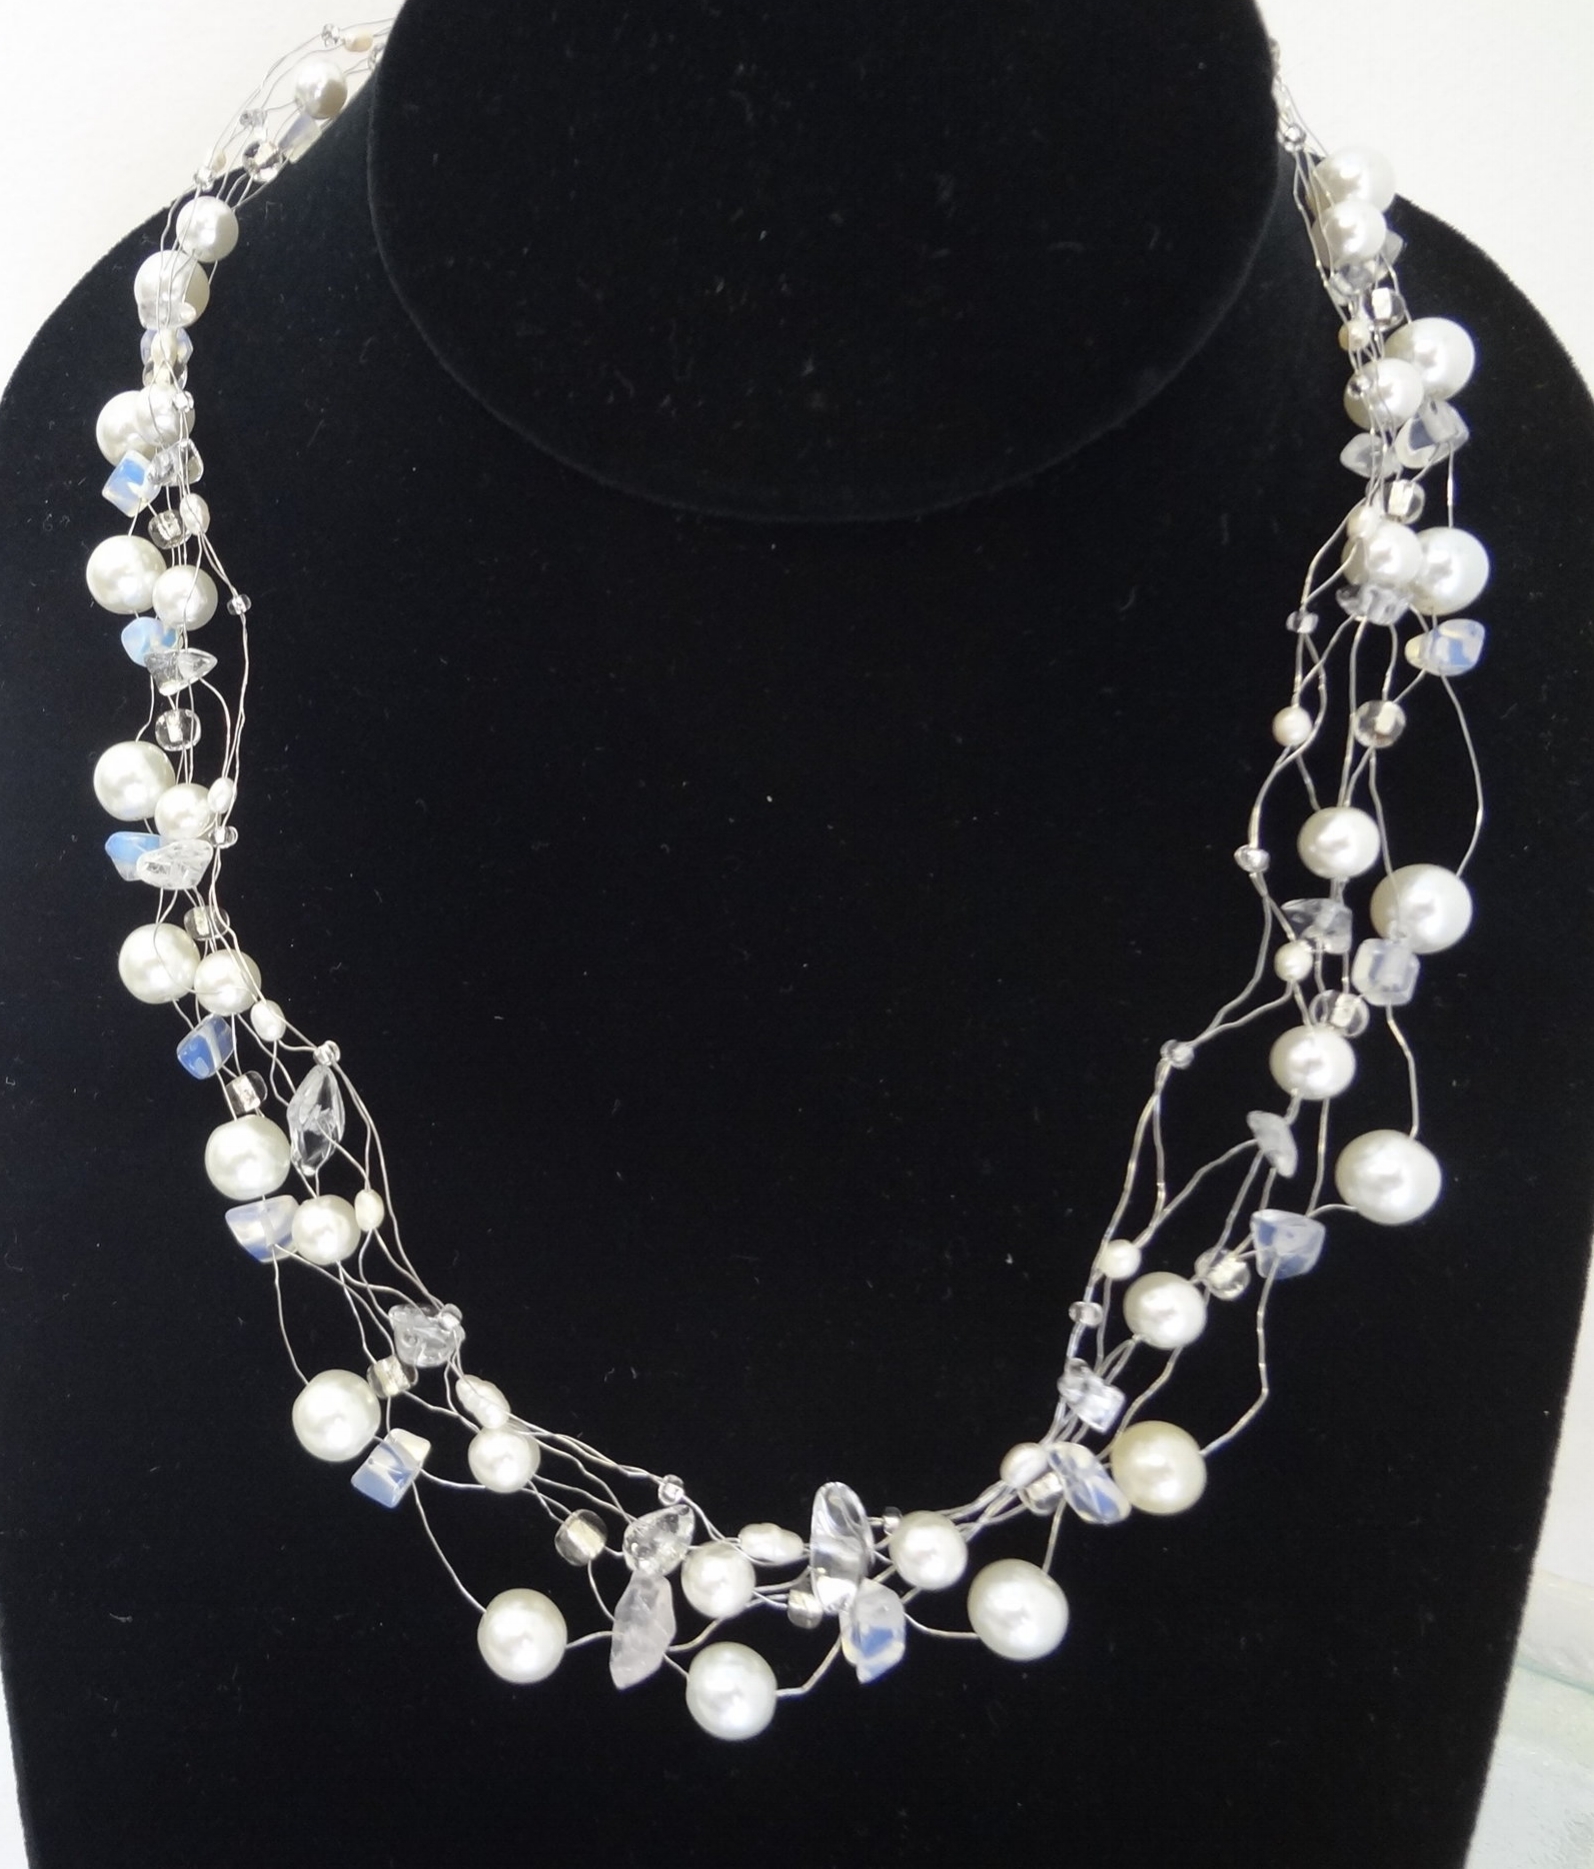 Pearls and Lace Necklace